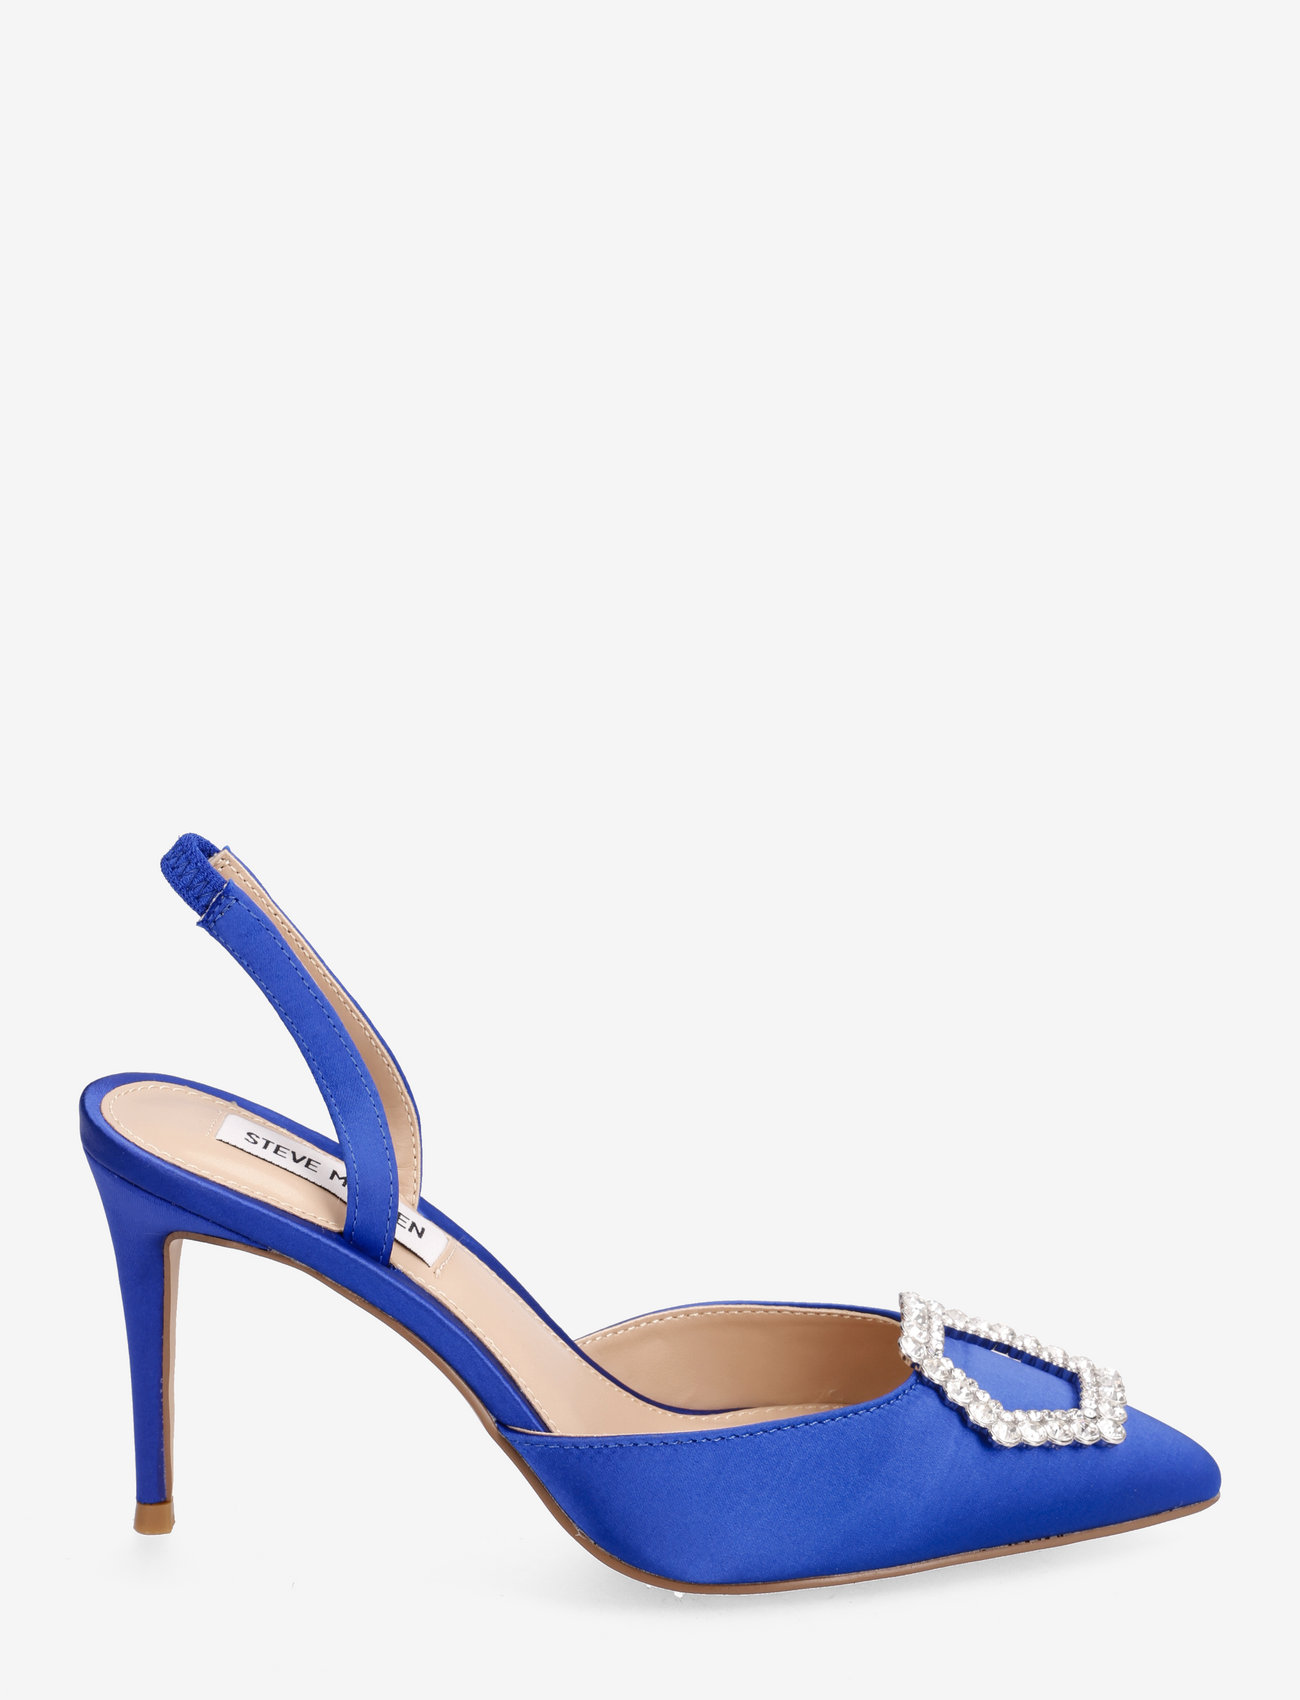 Steve Madden - Lucent Sandal - party wear at outlet prices - blue satin - 1